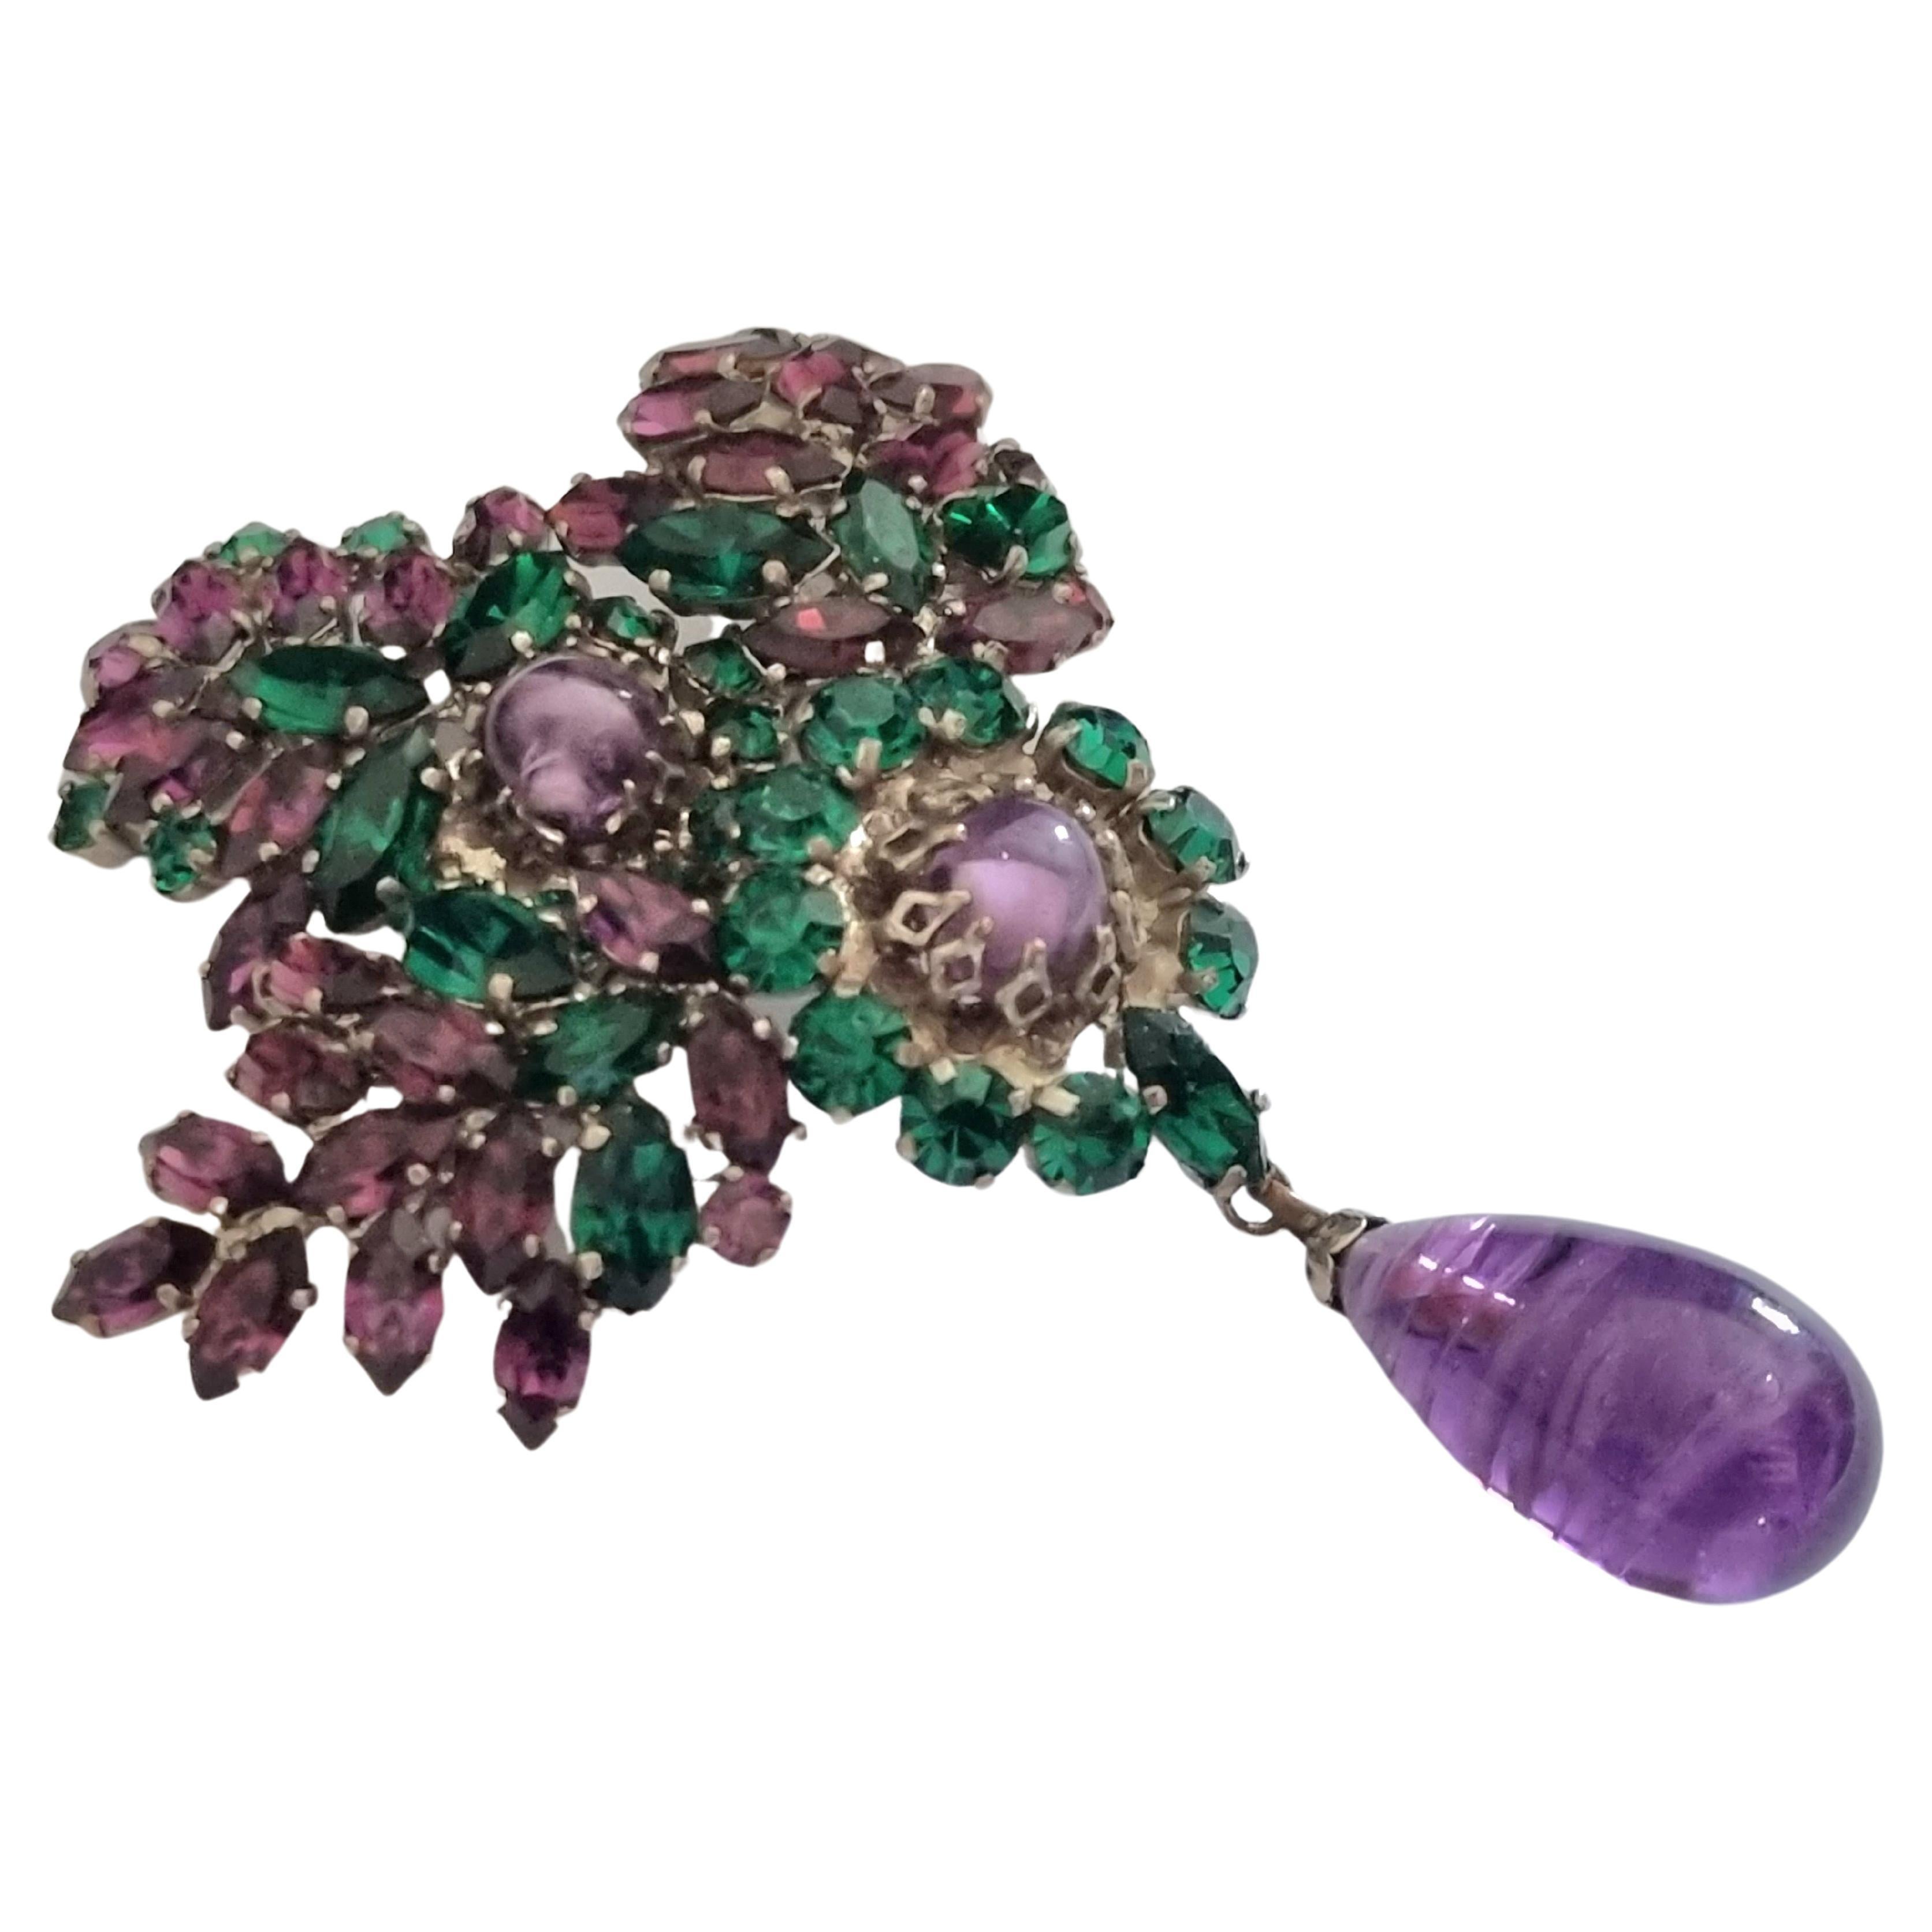 ROGER Jean Pierre, Magnificent old brooch, vintage from the 50s, High fashion